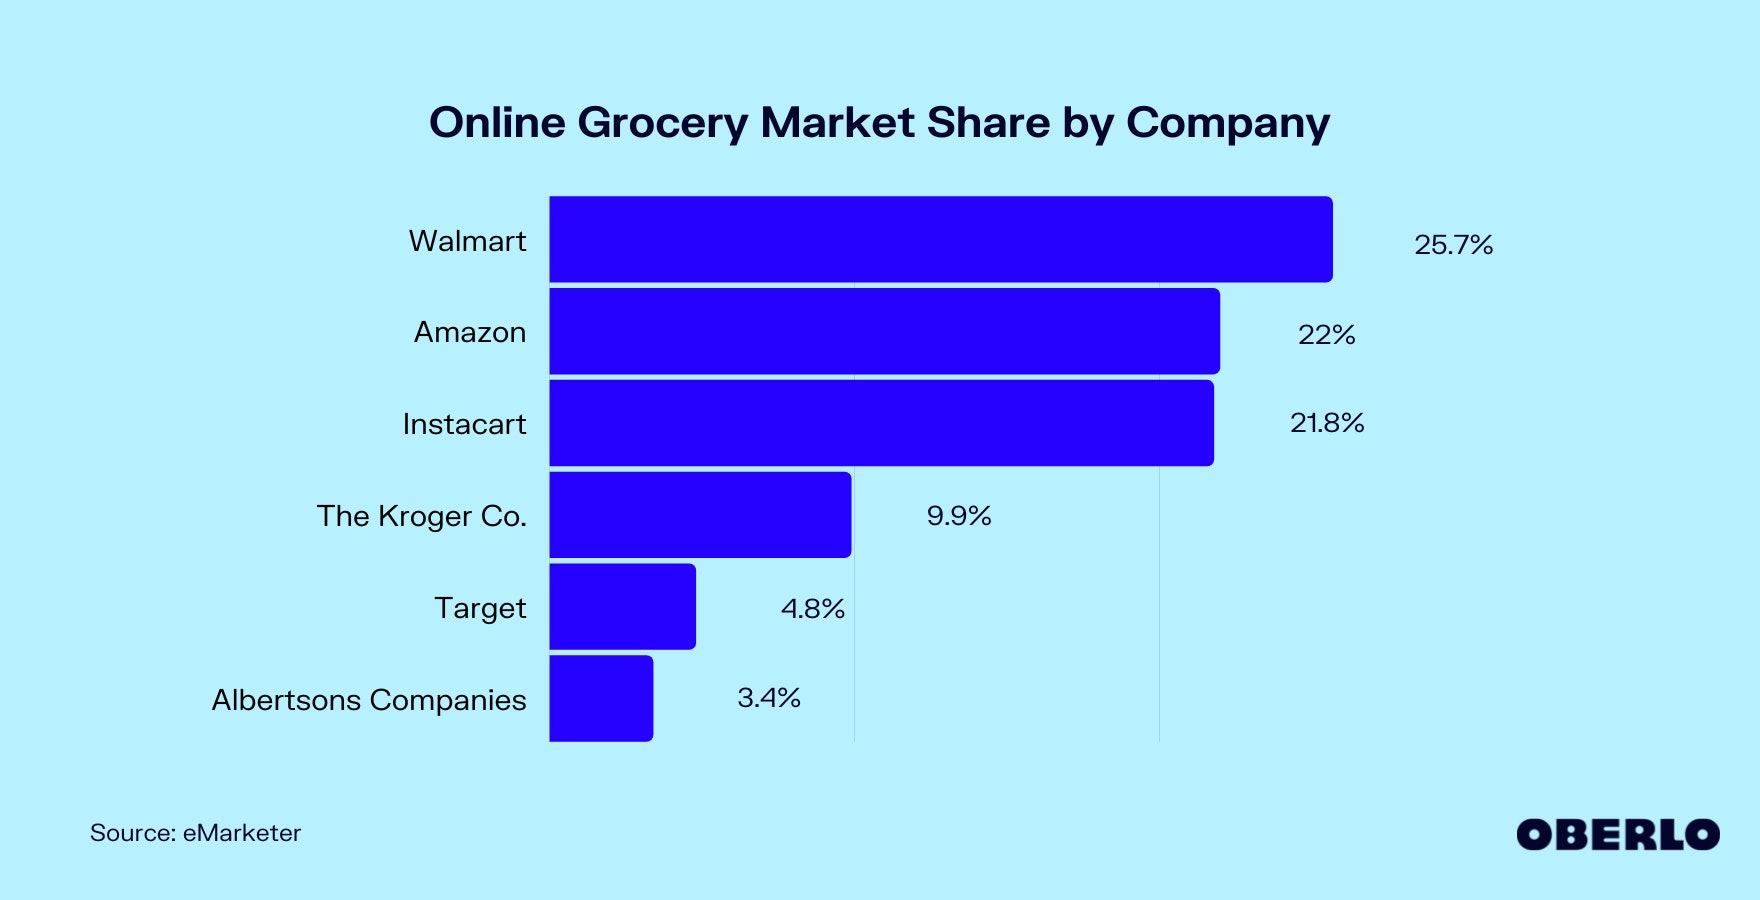 Chart showing Online Grocery Market Share by Company